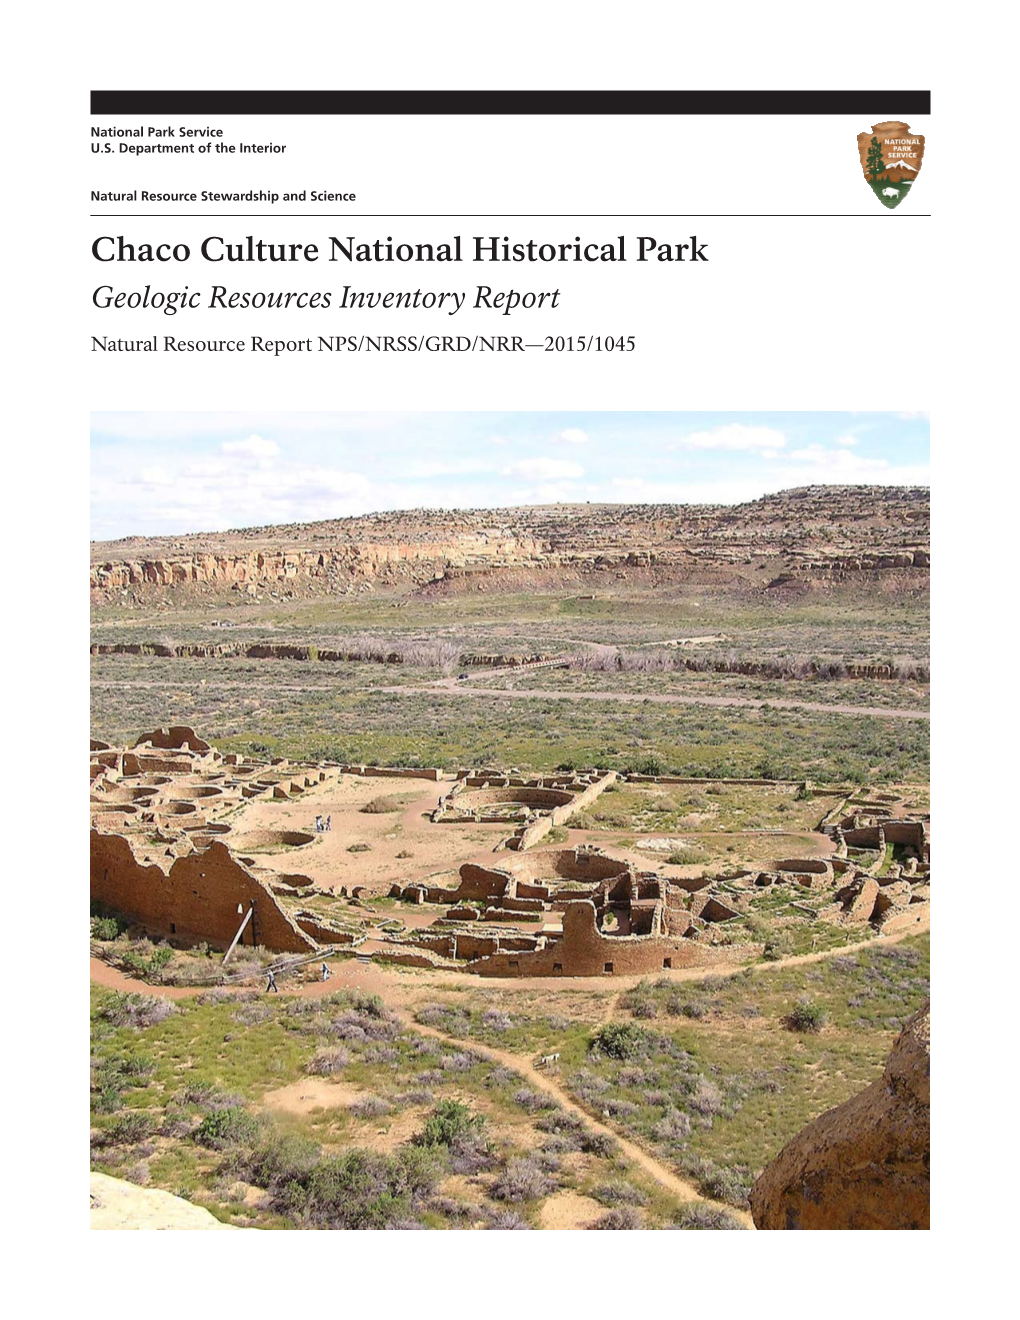 Chaco Culture National Historical Park: Geologic Resources Inventory Report